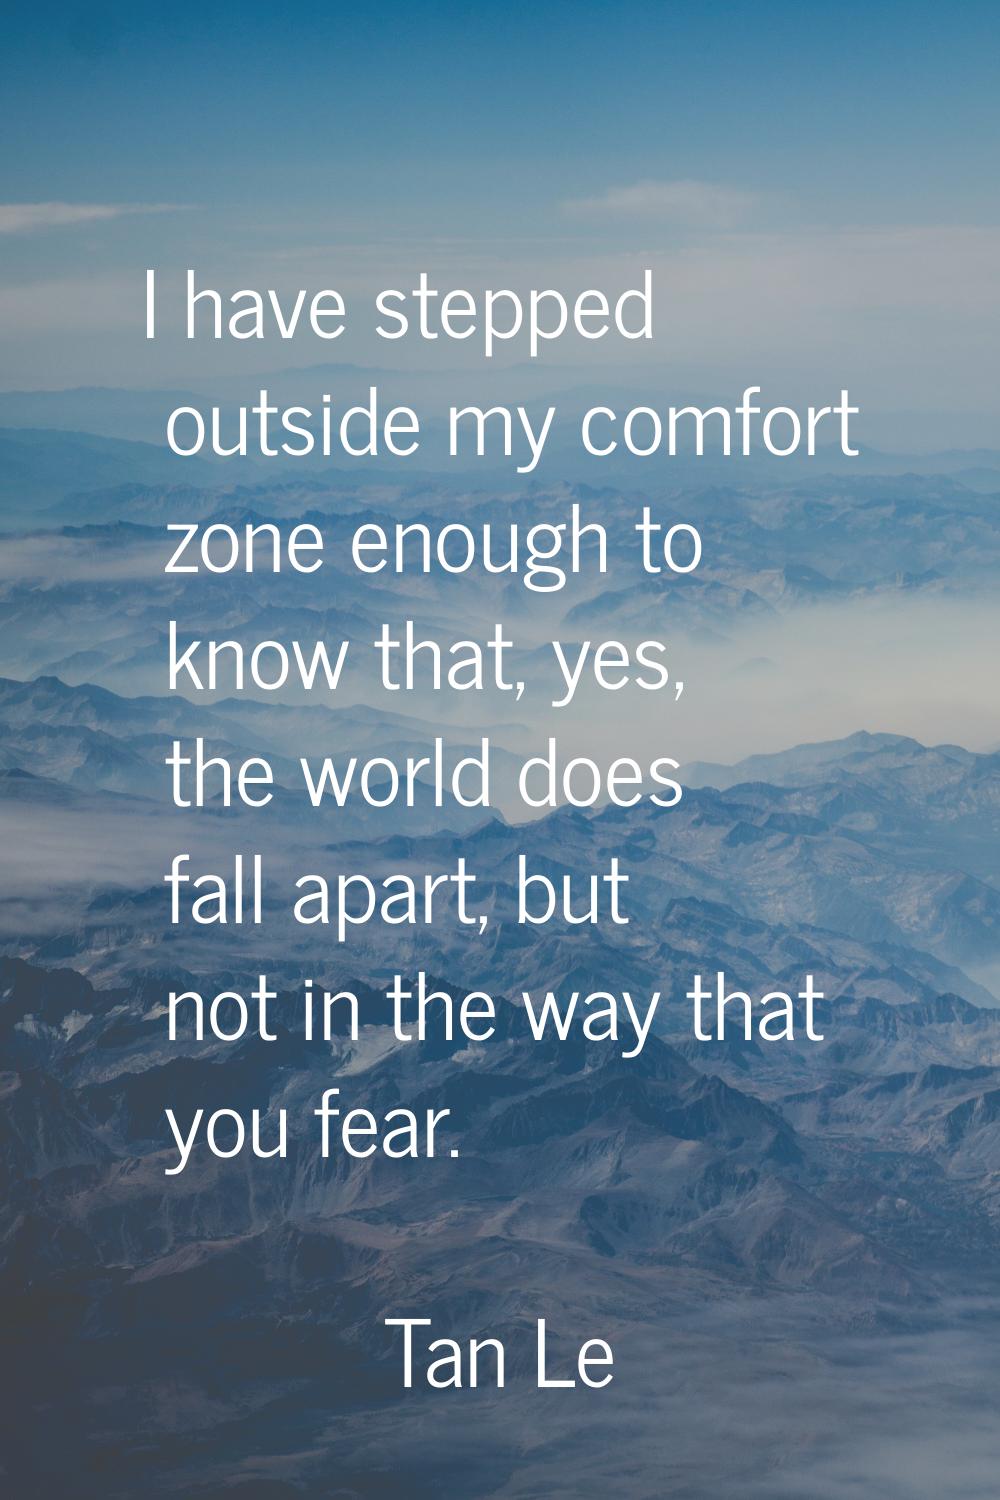 I have stepped outside my comfort zone enough to know that, yes, the world does fall apart, but not